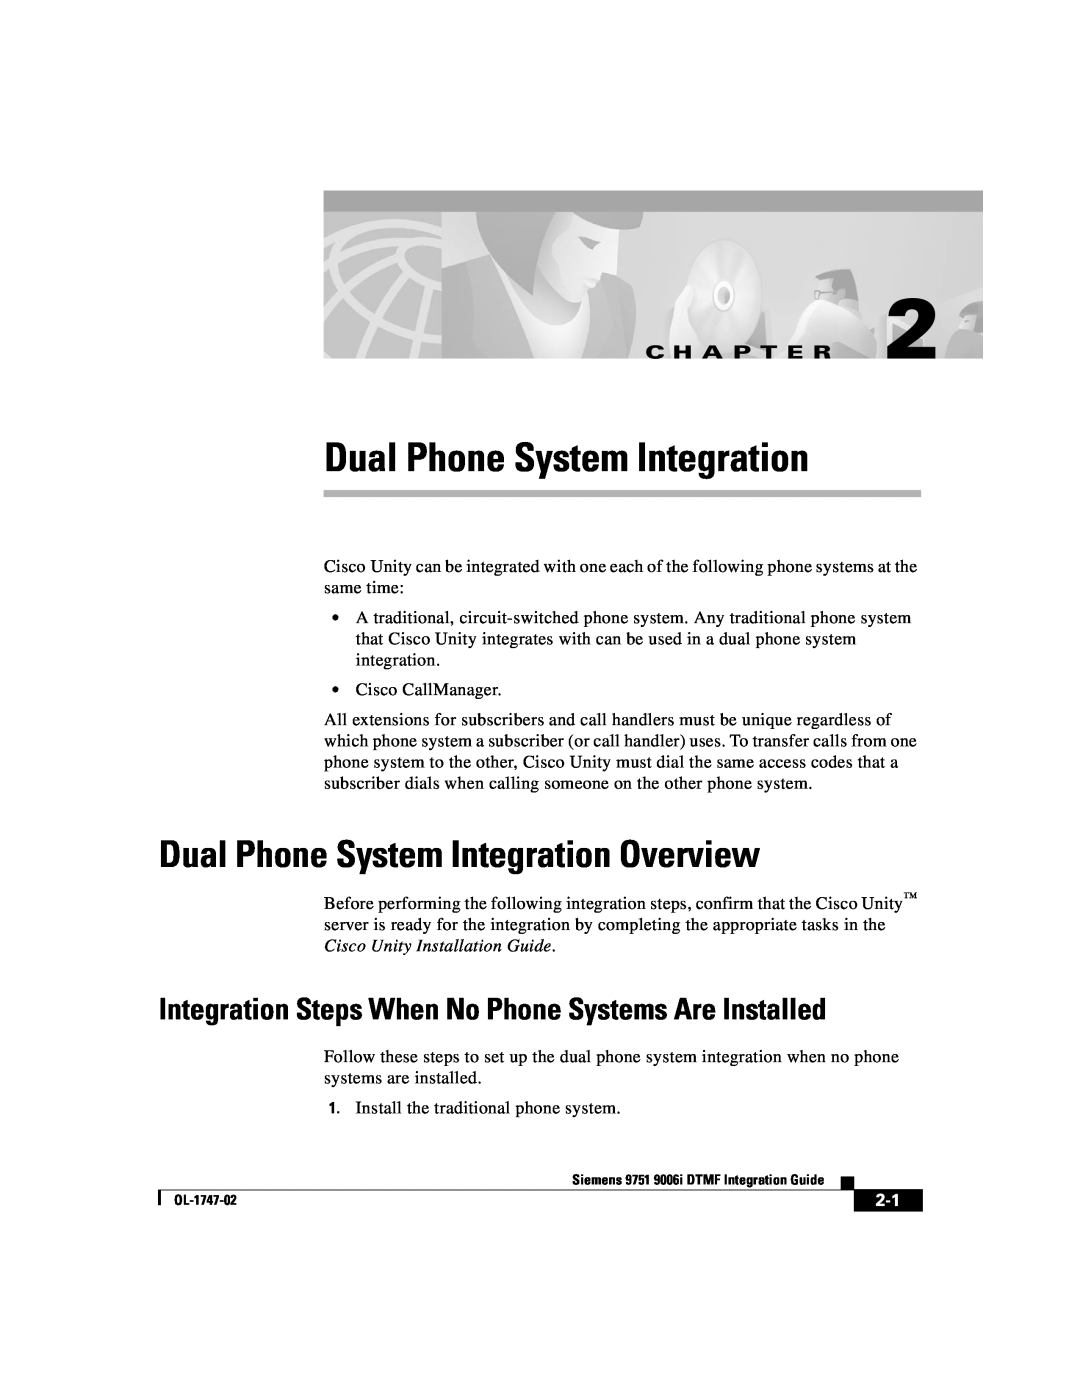 Able Planet OL-1747-02 manual Dual Phone System Integration Overview, C H A P T E R 